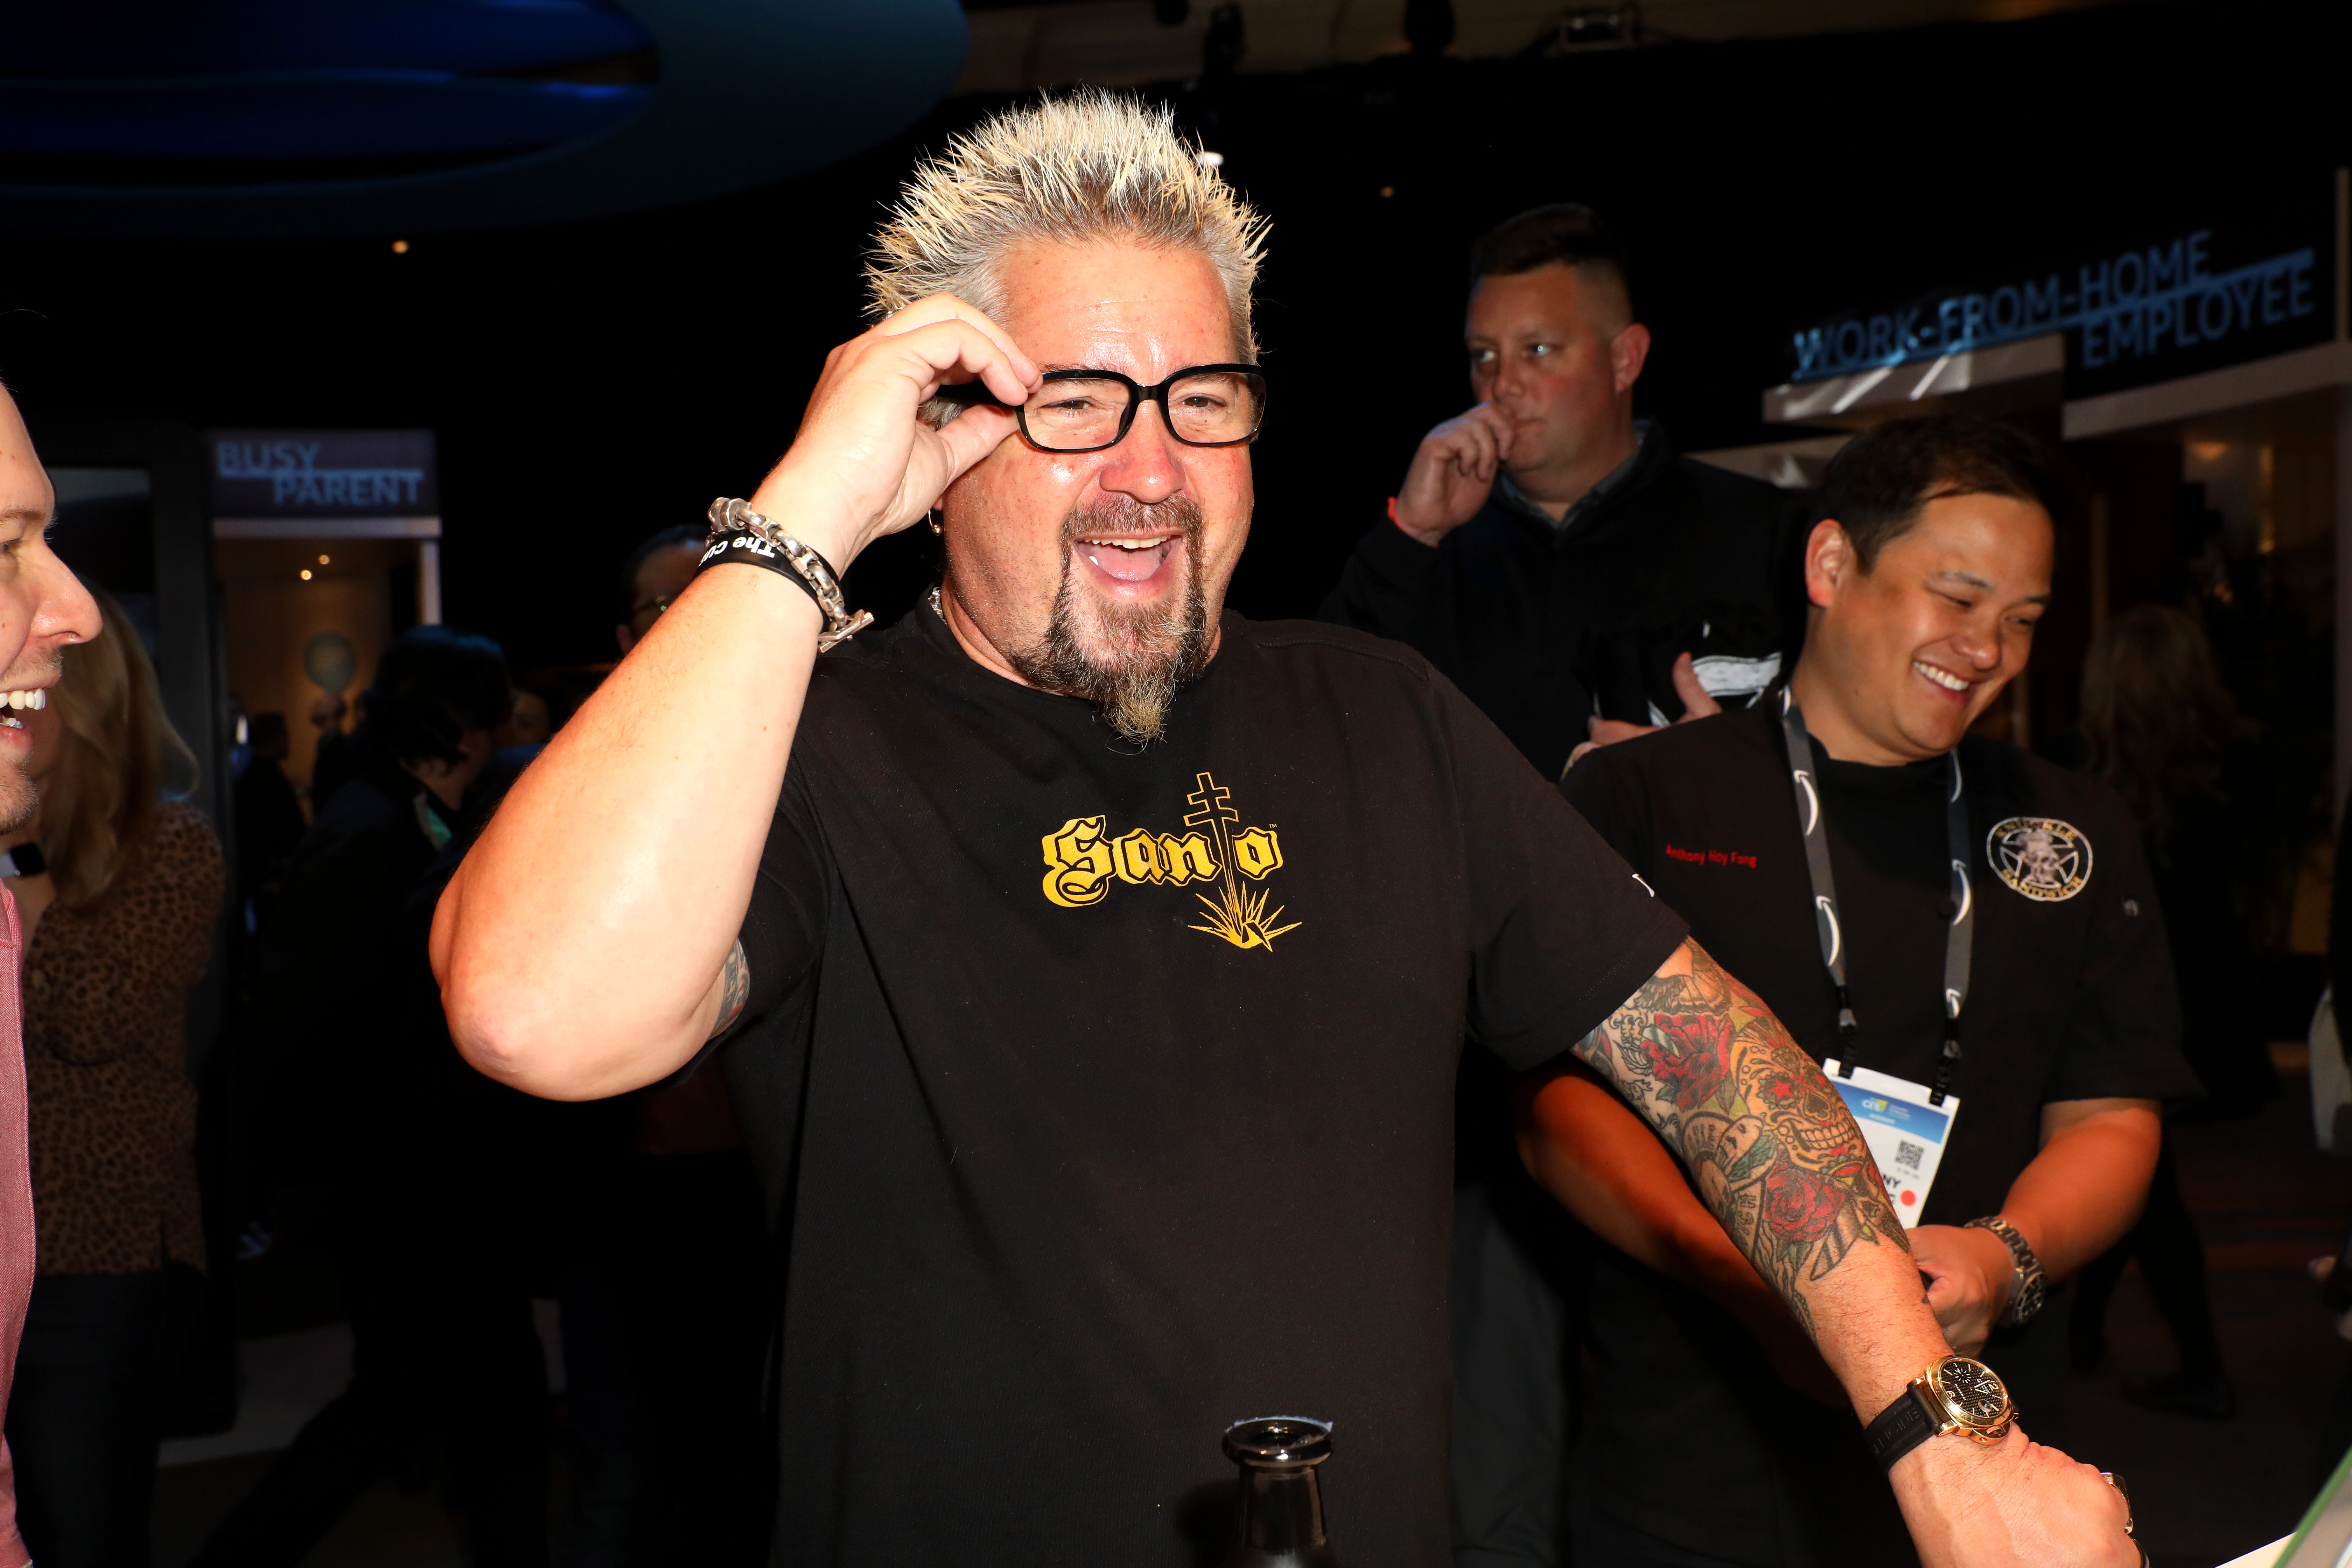 Guy Fieri, wearing a black t-shirt and glasses, walks by with his famously spiky blond hair